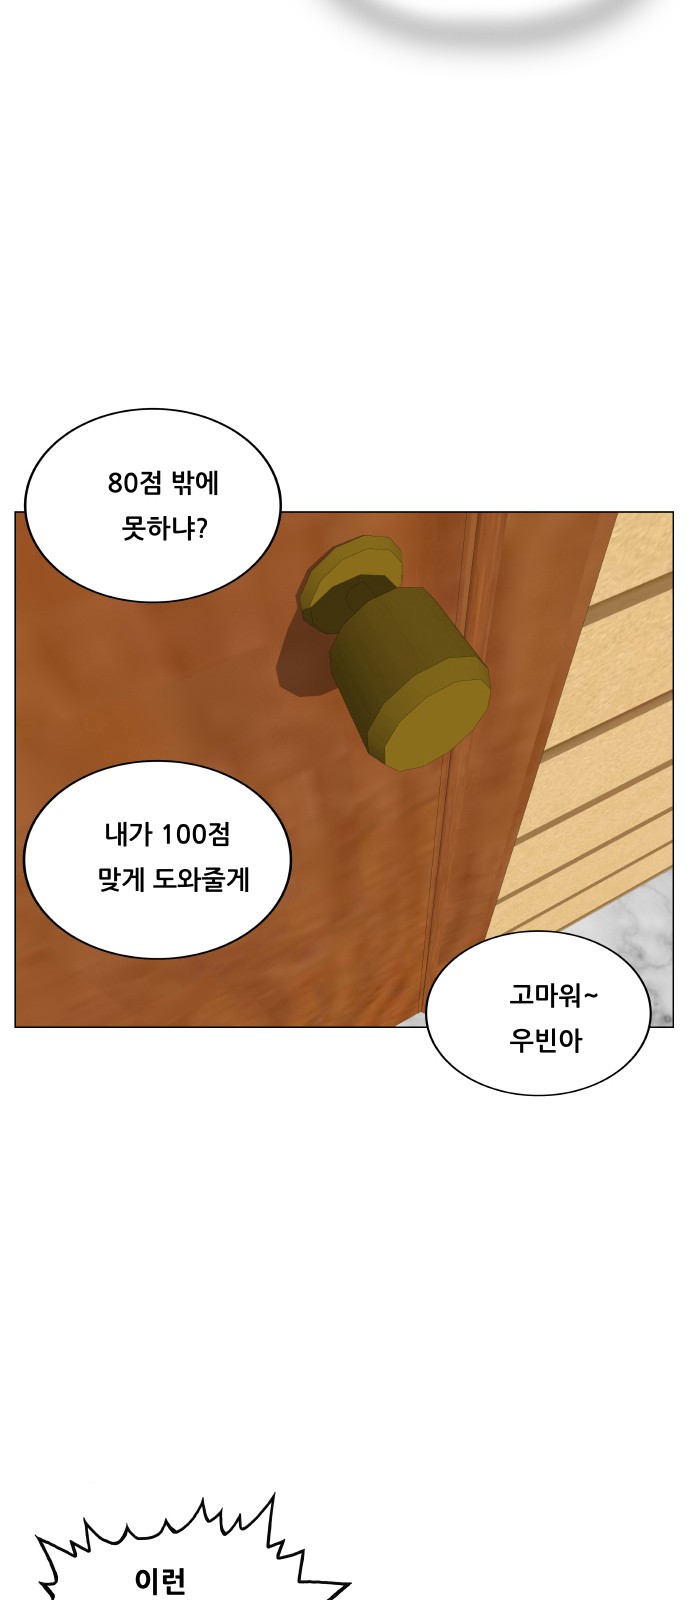 Ultimate Legend - Kang Hae Hyo - Chapter 409 - Page 2